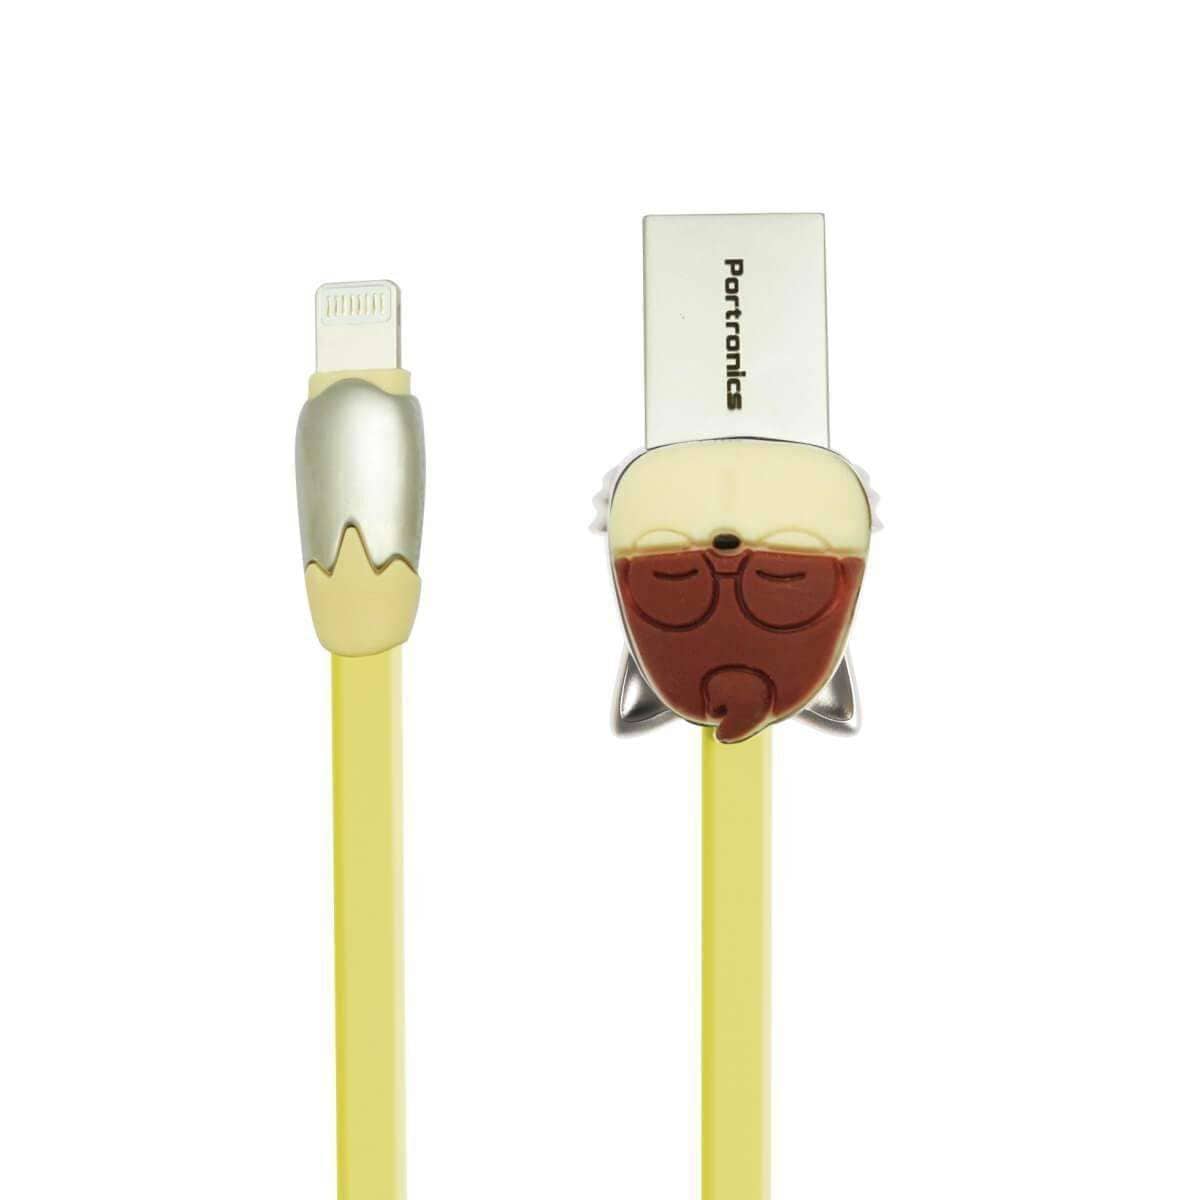 PORTRONICS-Konnect Squirrel 2.1A Lightning Cable